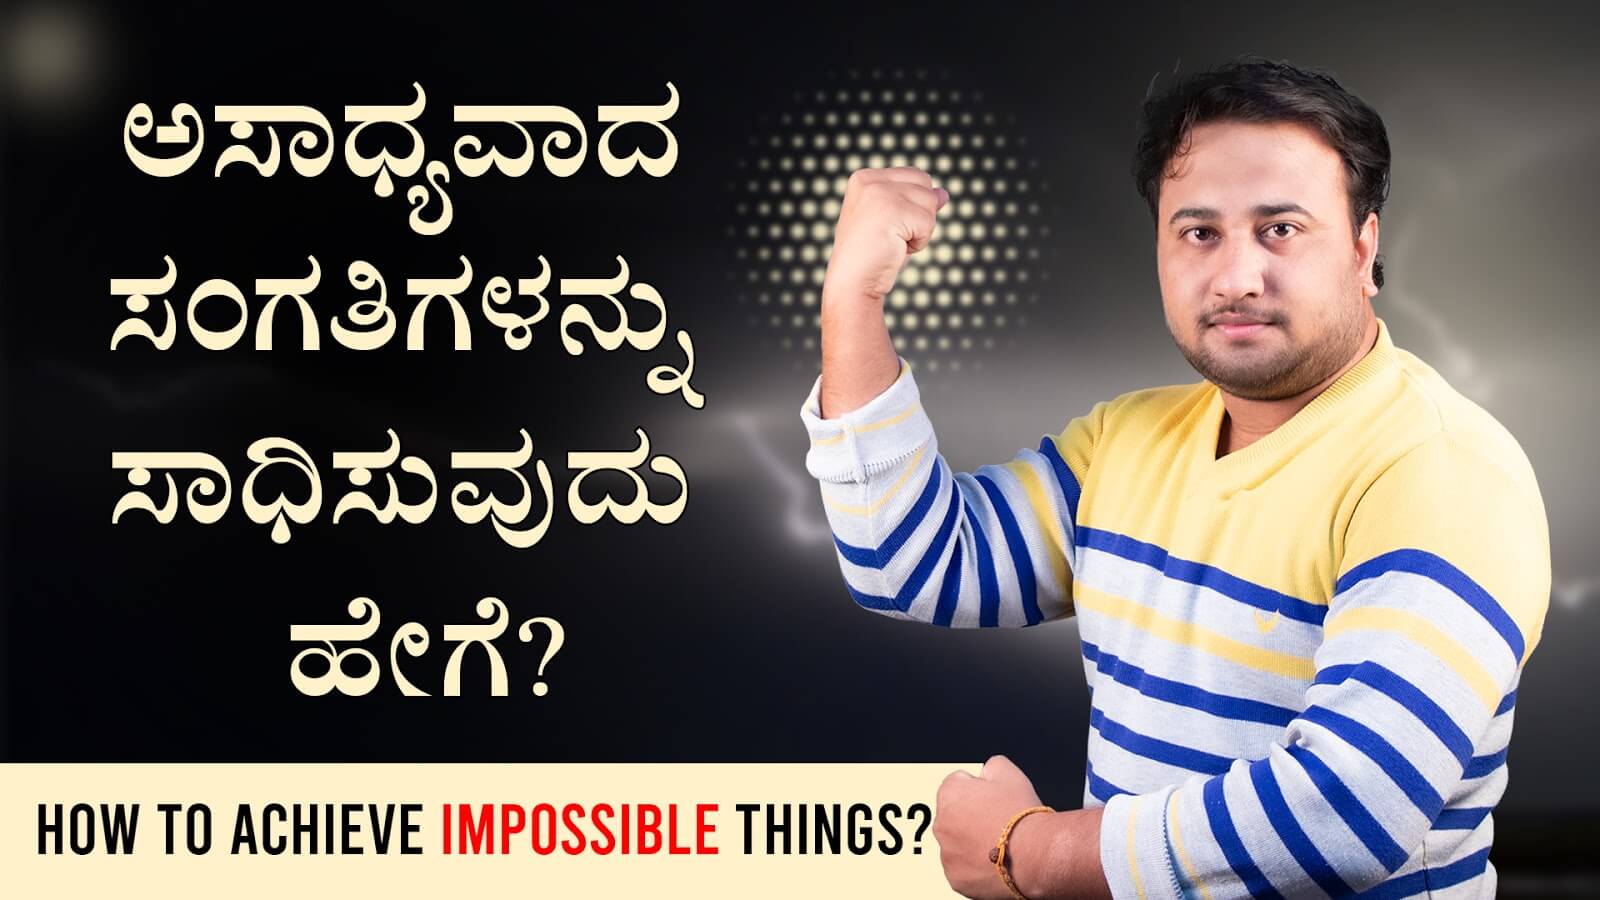 You are currently viewing ಅಸಾಧ್ಯವಾದ ಸಂಗತಿಗಳನ್ನು ಸಾಧಿಸುವುದು ಹೇಗೆ? – How to achieve impossible things? in Kannada